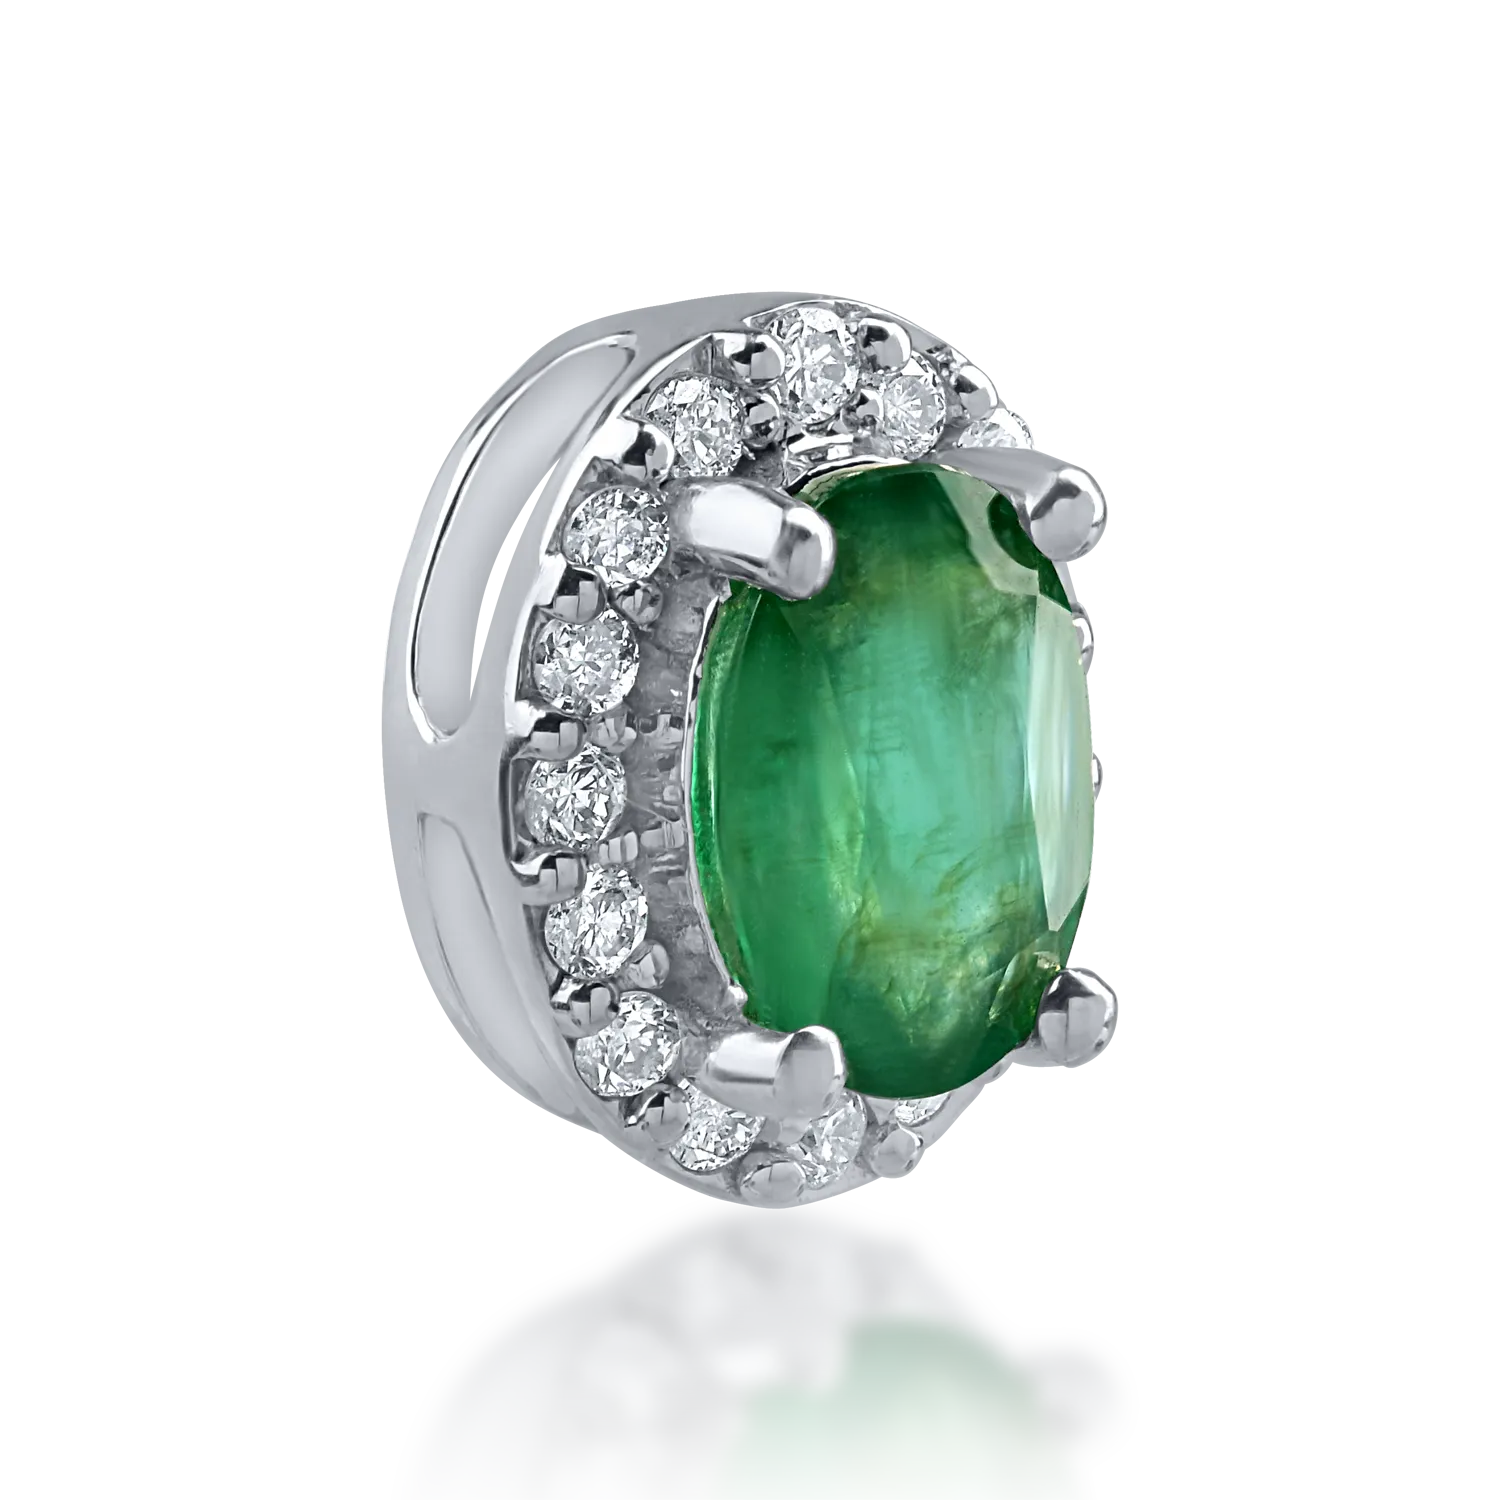 White gold oval pendant with 0.42ct emerald and 0.08ct diamonds